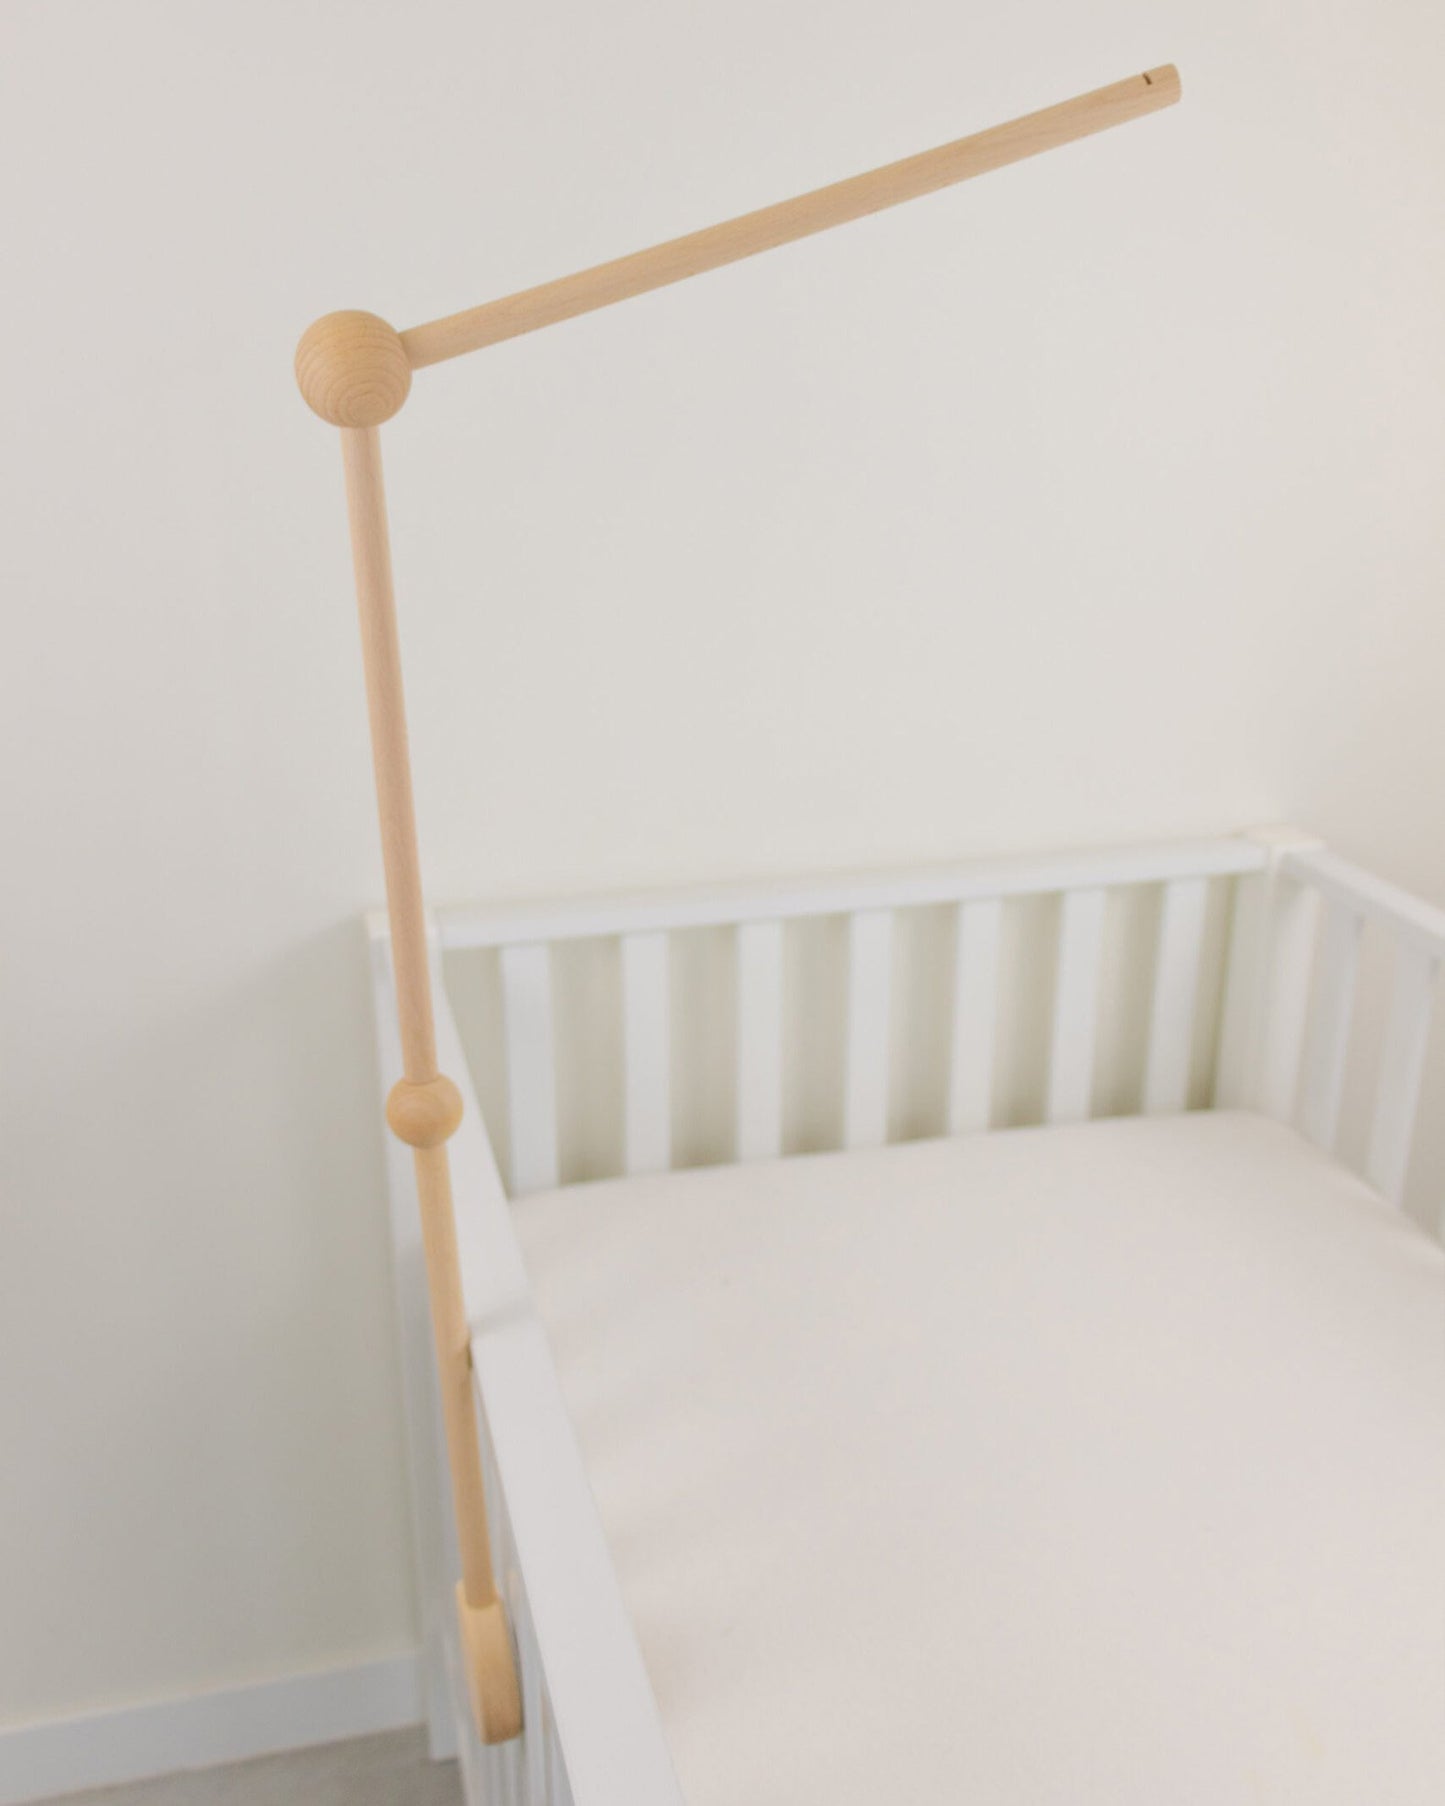 Wooden baby mobile arm fixed